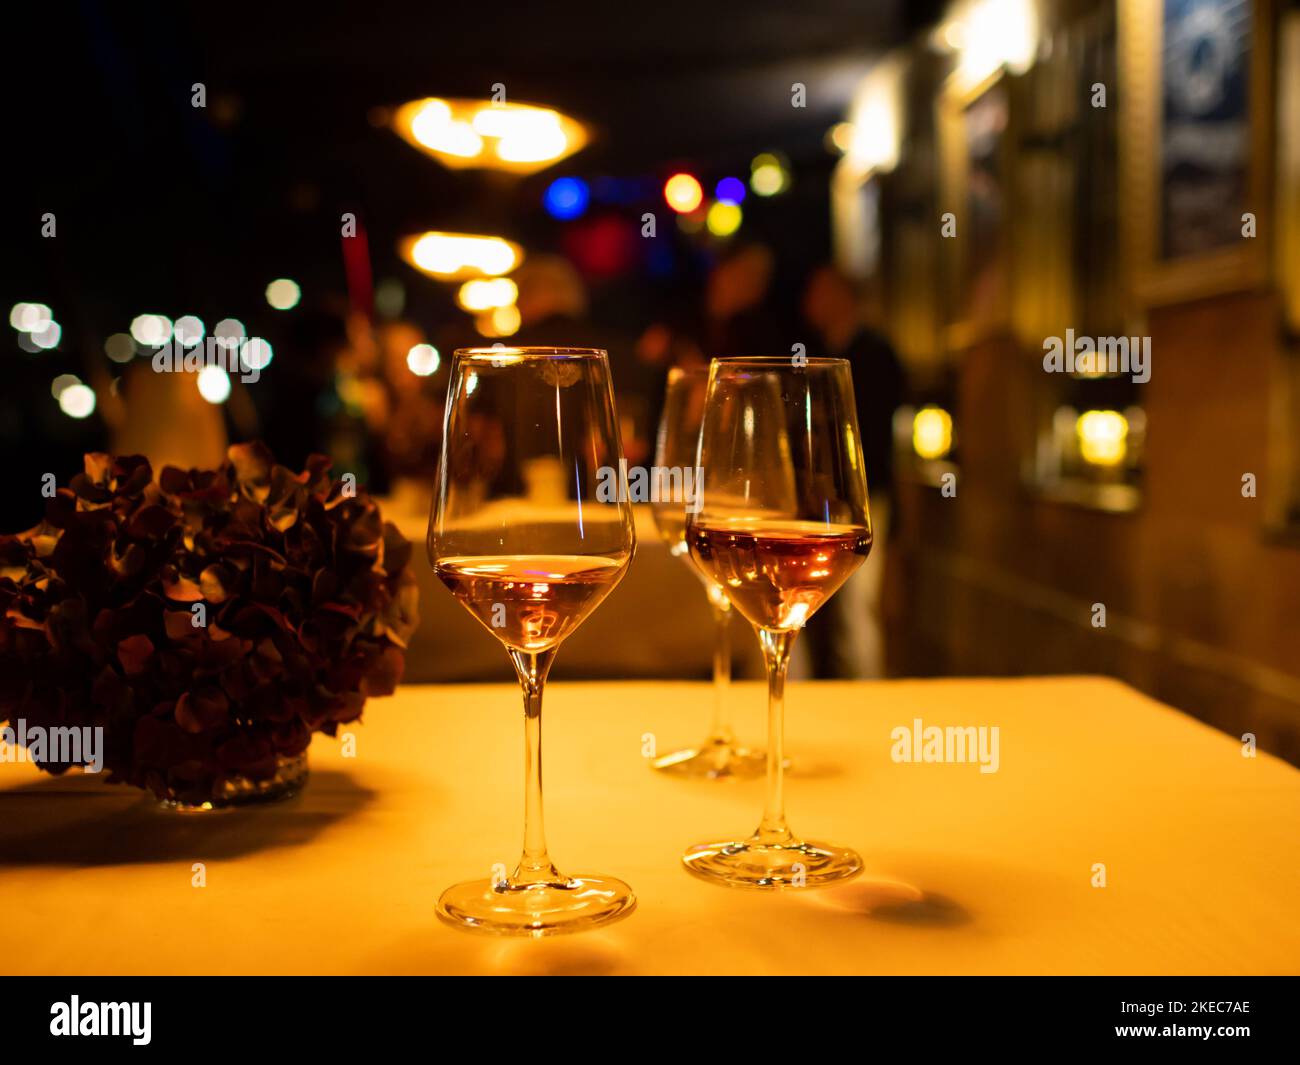 Two glasses with sparkling wine standing on a table. Warm tungsten light is illuminating the scene. Lipstick is on the glass of the alcoholic beverage Stock Photo